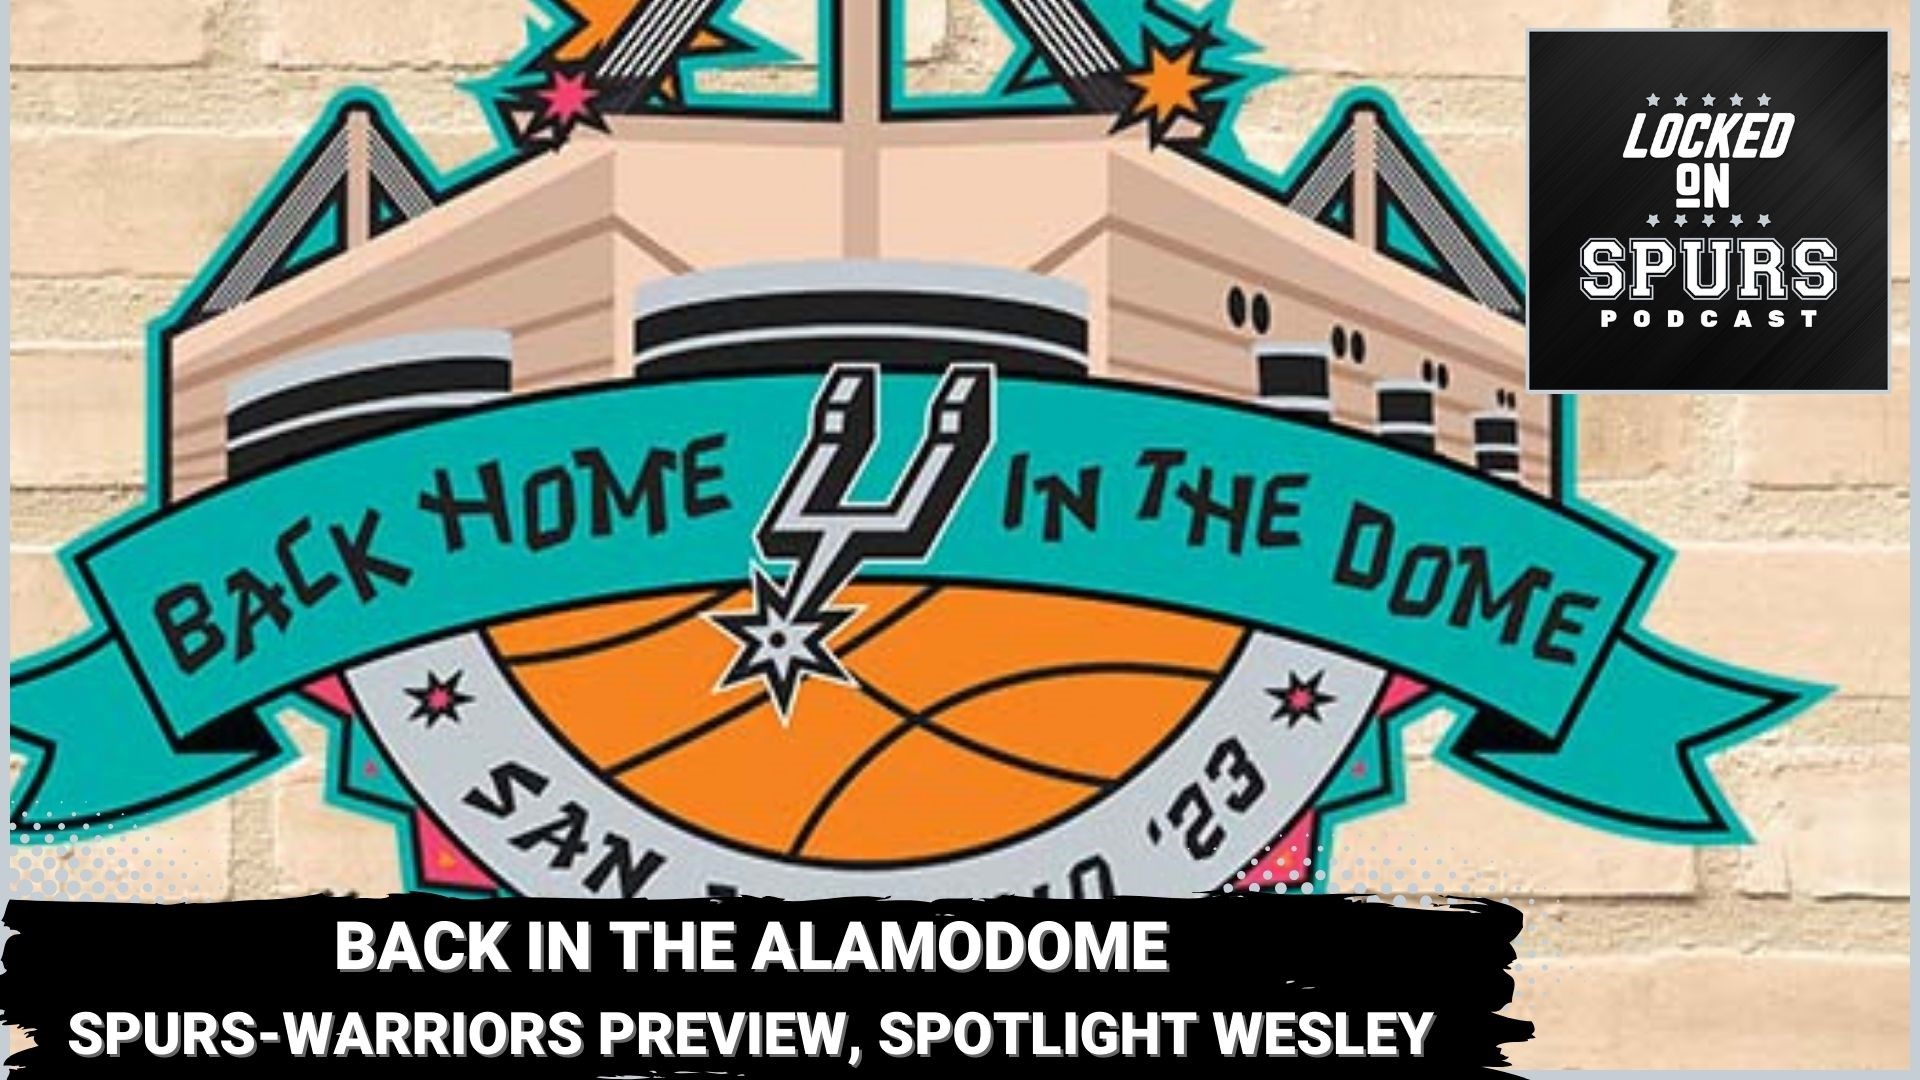 The Spurs are heading back to the Alamodome for a game versus the Warriors.